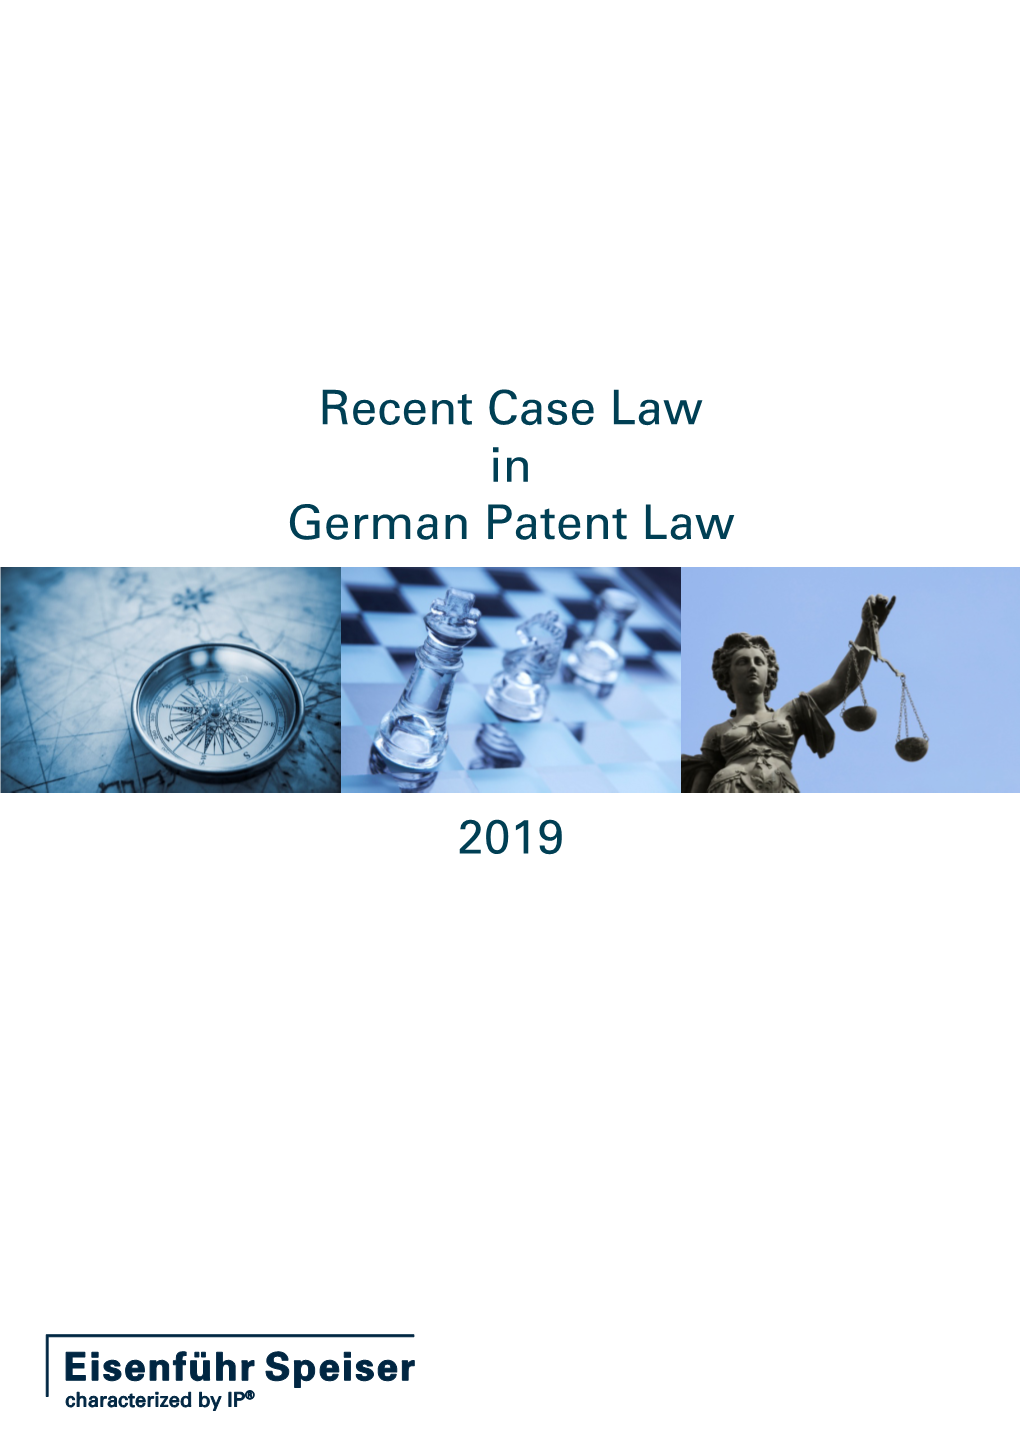 Recent Case Law in German Patent Law 2019